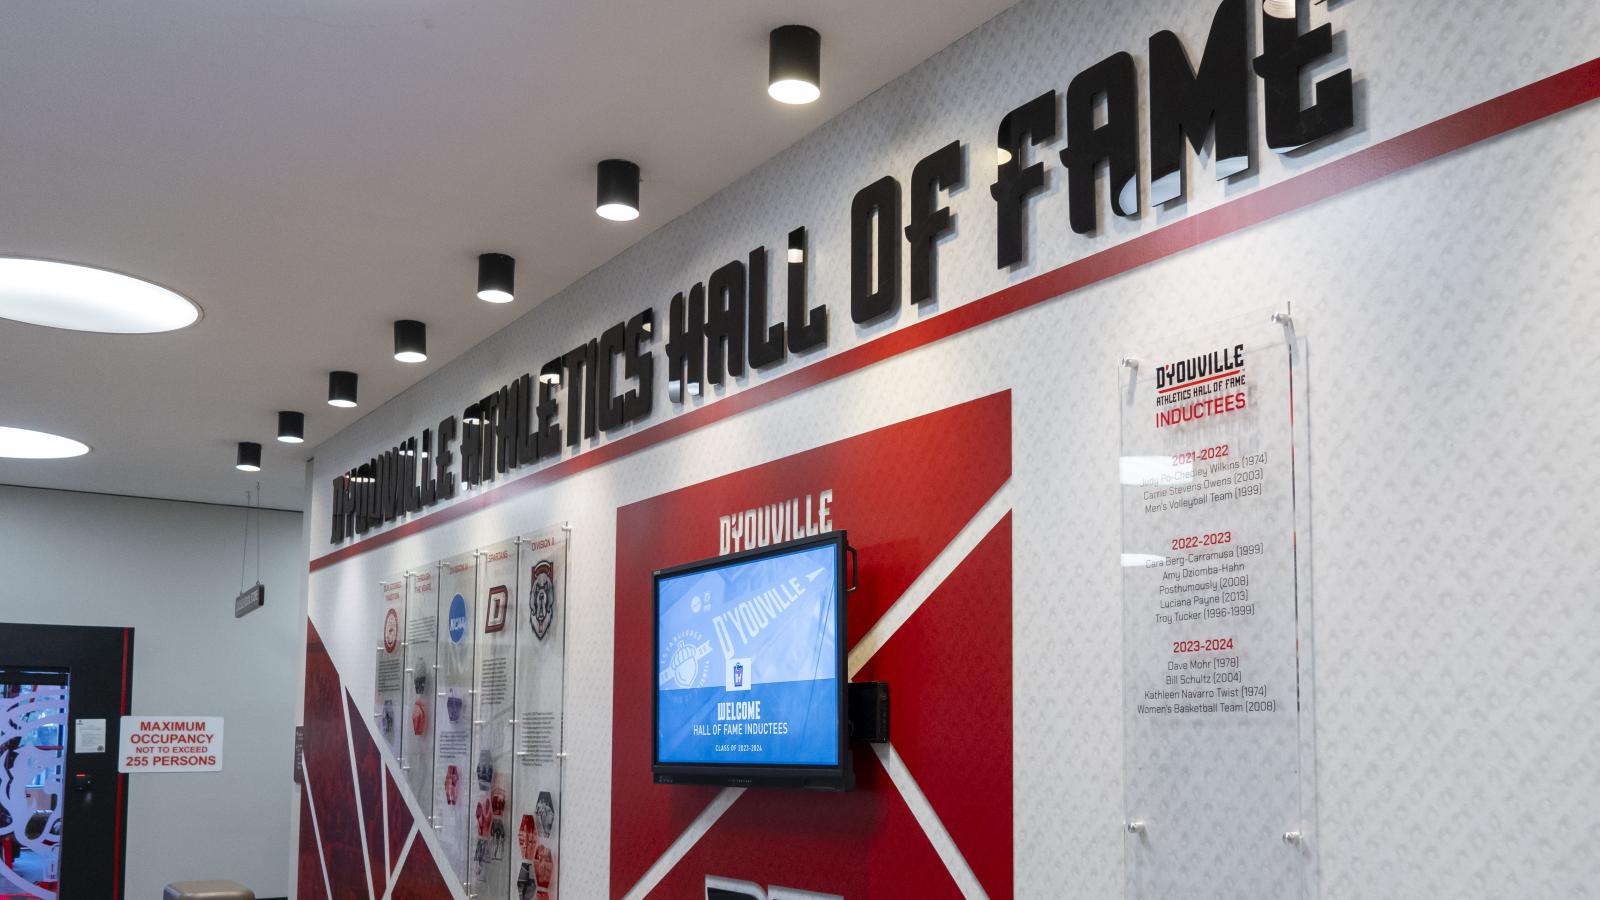 Display Wall for the Athletics Hall of Fame inside the College Center building.